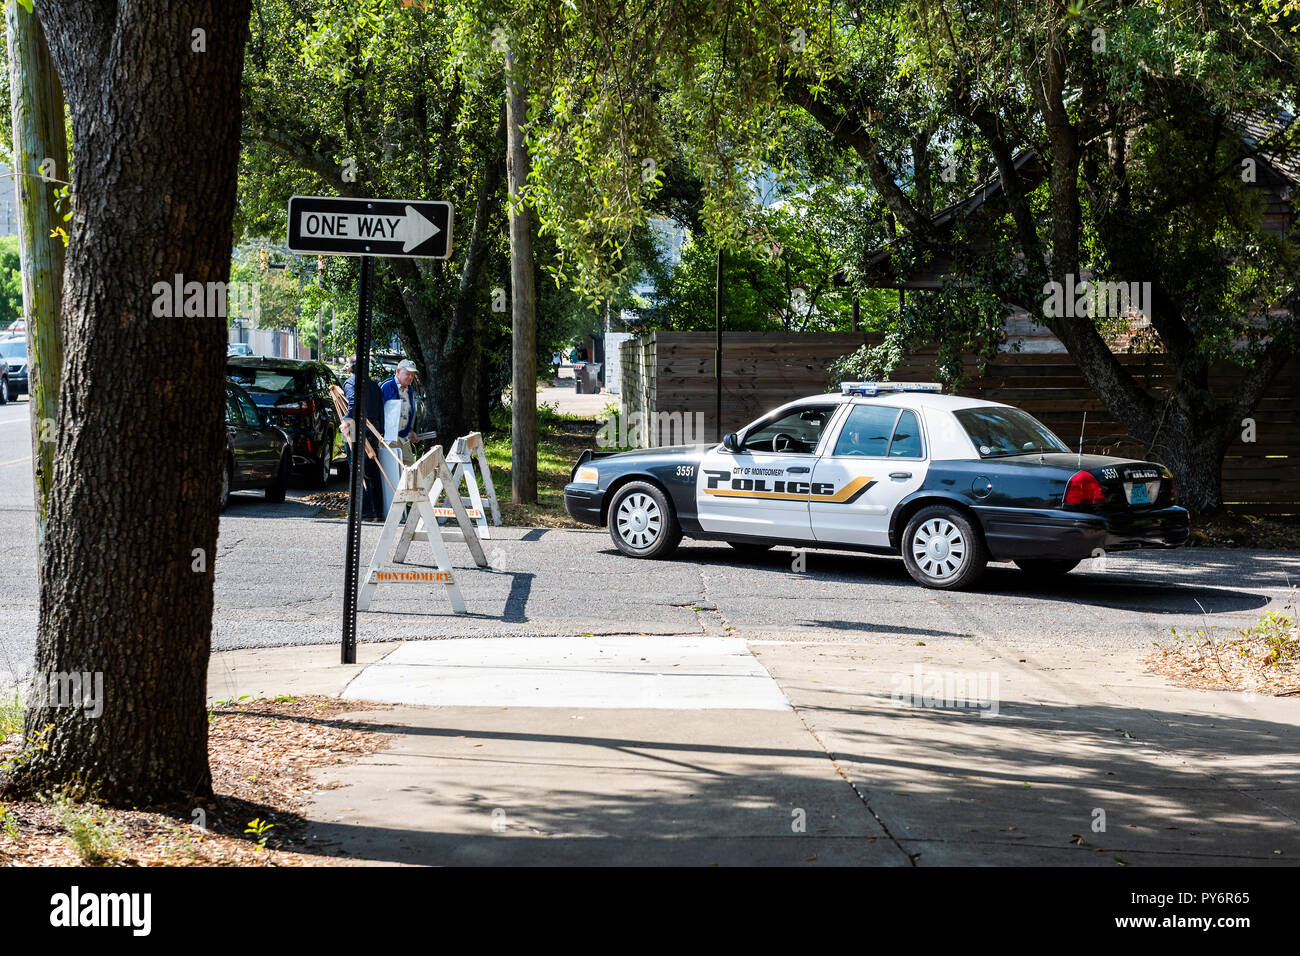 Montgomery, USA - April 21, 2018: Alabama city police officer car on street, with sign, people walking on sidewalk Stock Photo